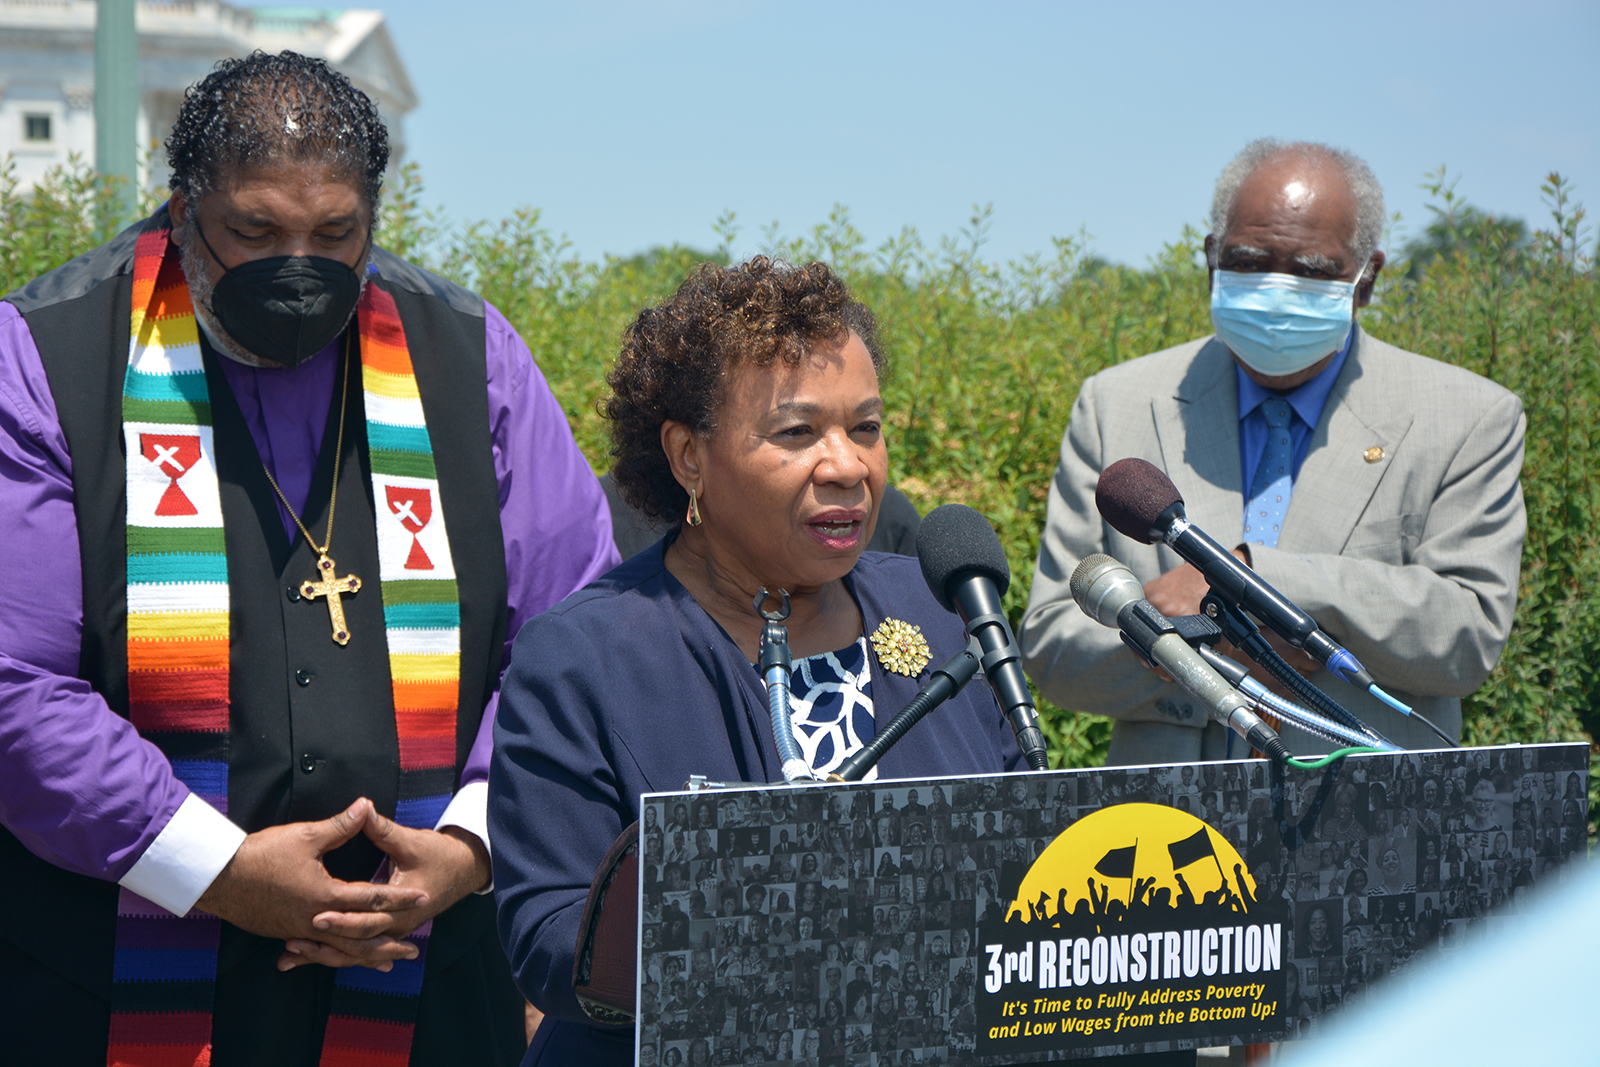 Rep. Barbara Lee of California speaks during the announcement of a new resolution titled “Third Reconstruction: Fully Addressing Poverty and Low Wages from the Bottom Up,” Thursday, May 20, 2021, on Capitol Hill in Washington. RNS photo by Jack Jenkins